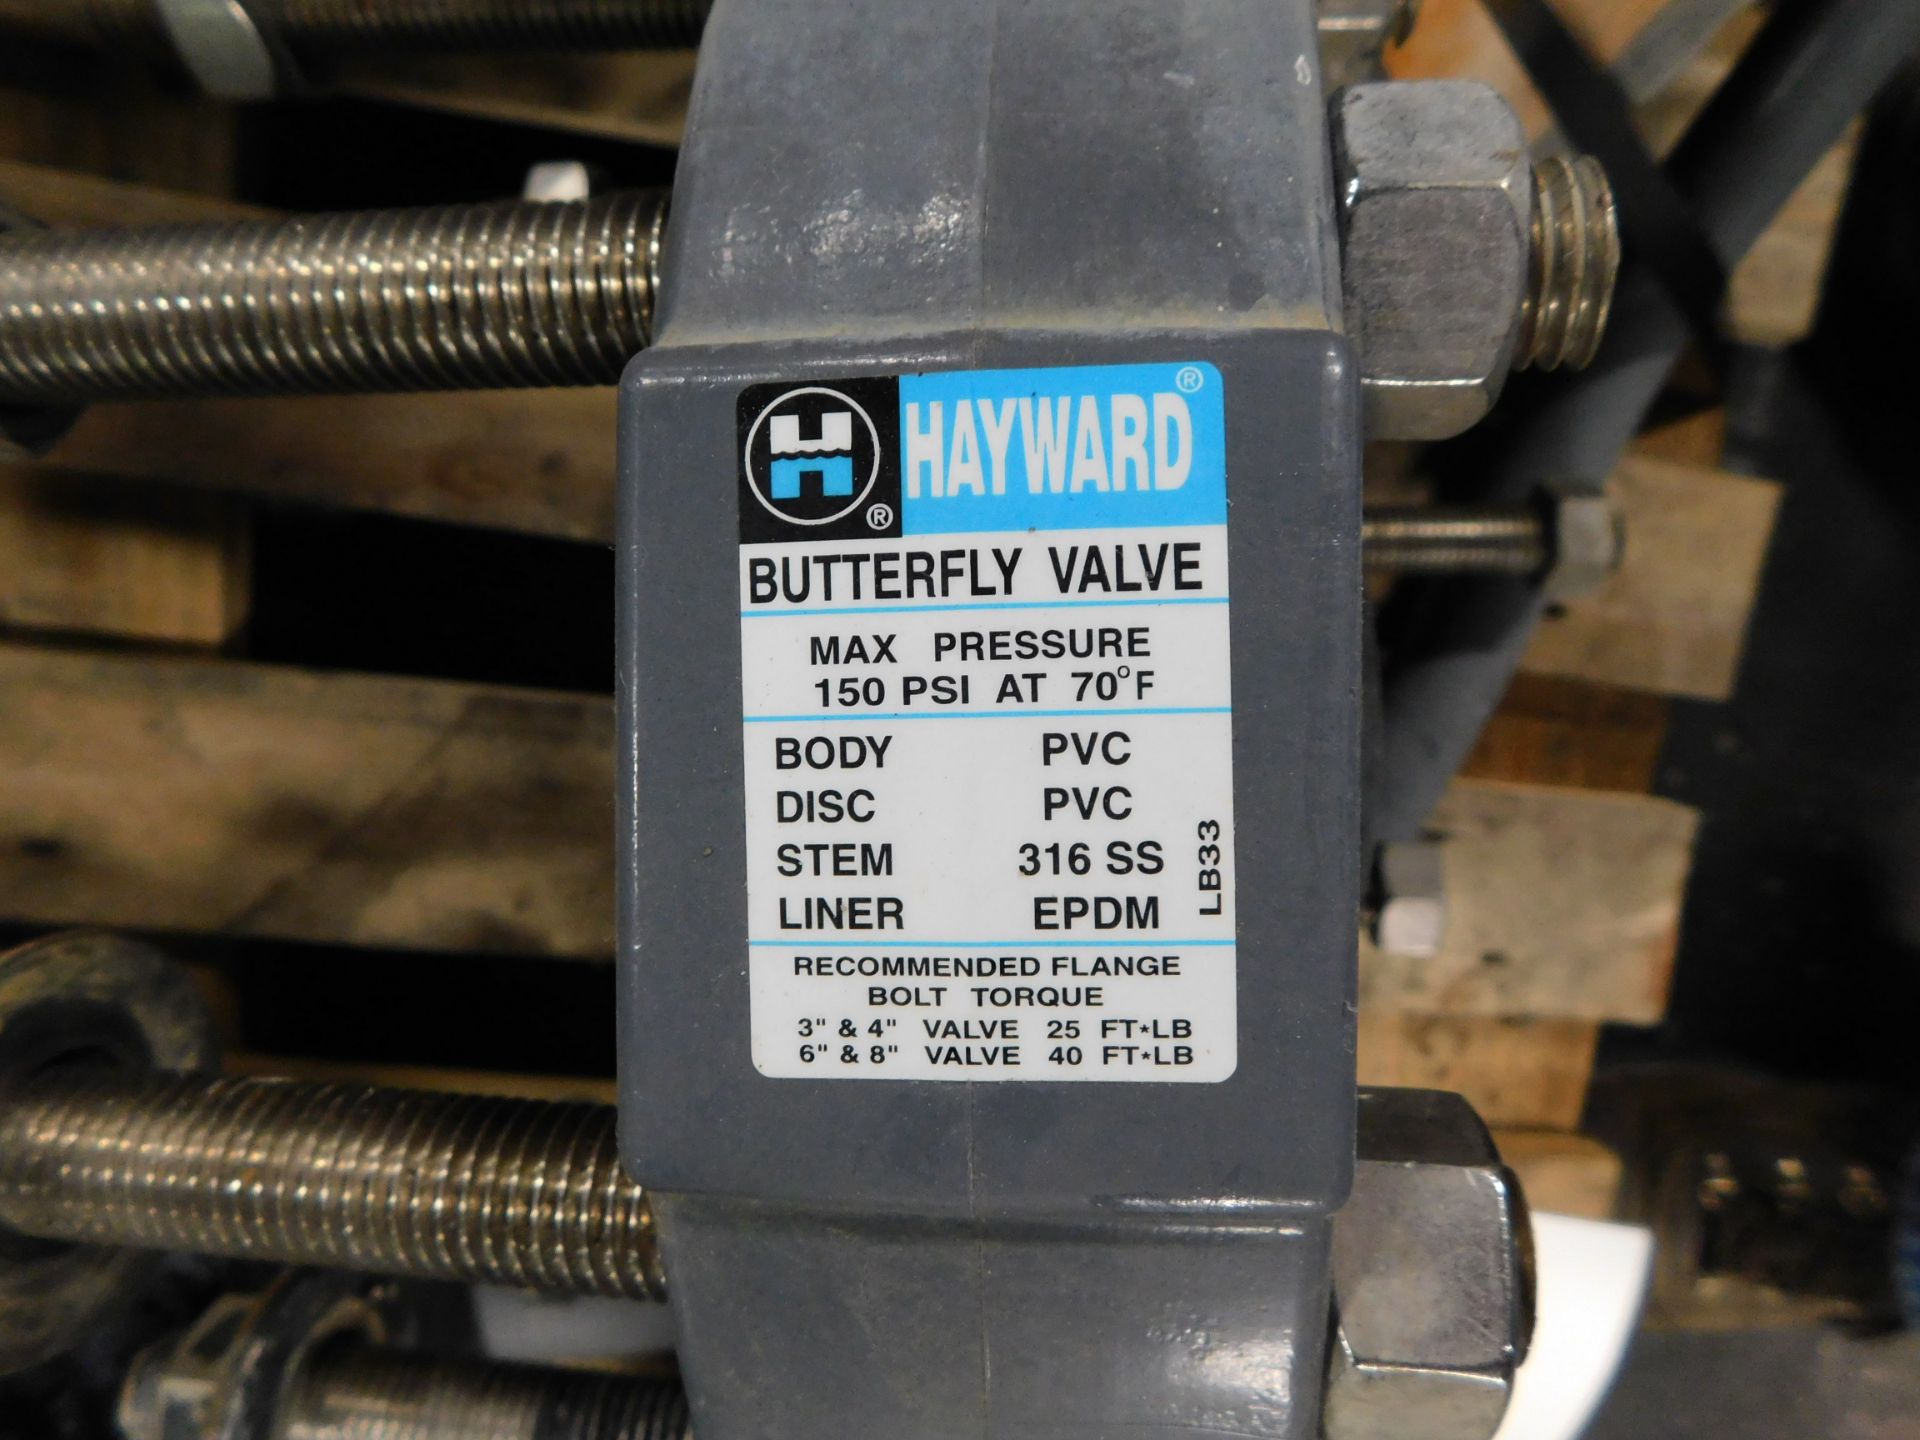 LOT OF (4) LIMITORQUE ACTUATORS W/ 6" HAYWARD BUTTERFLY VALVES - Image 2 of 2